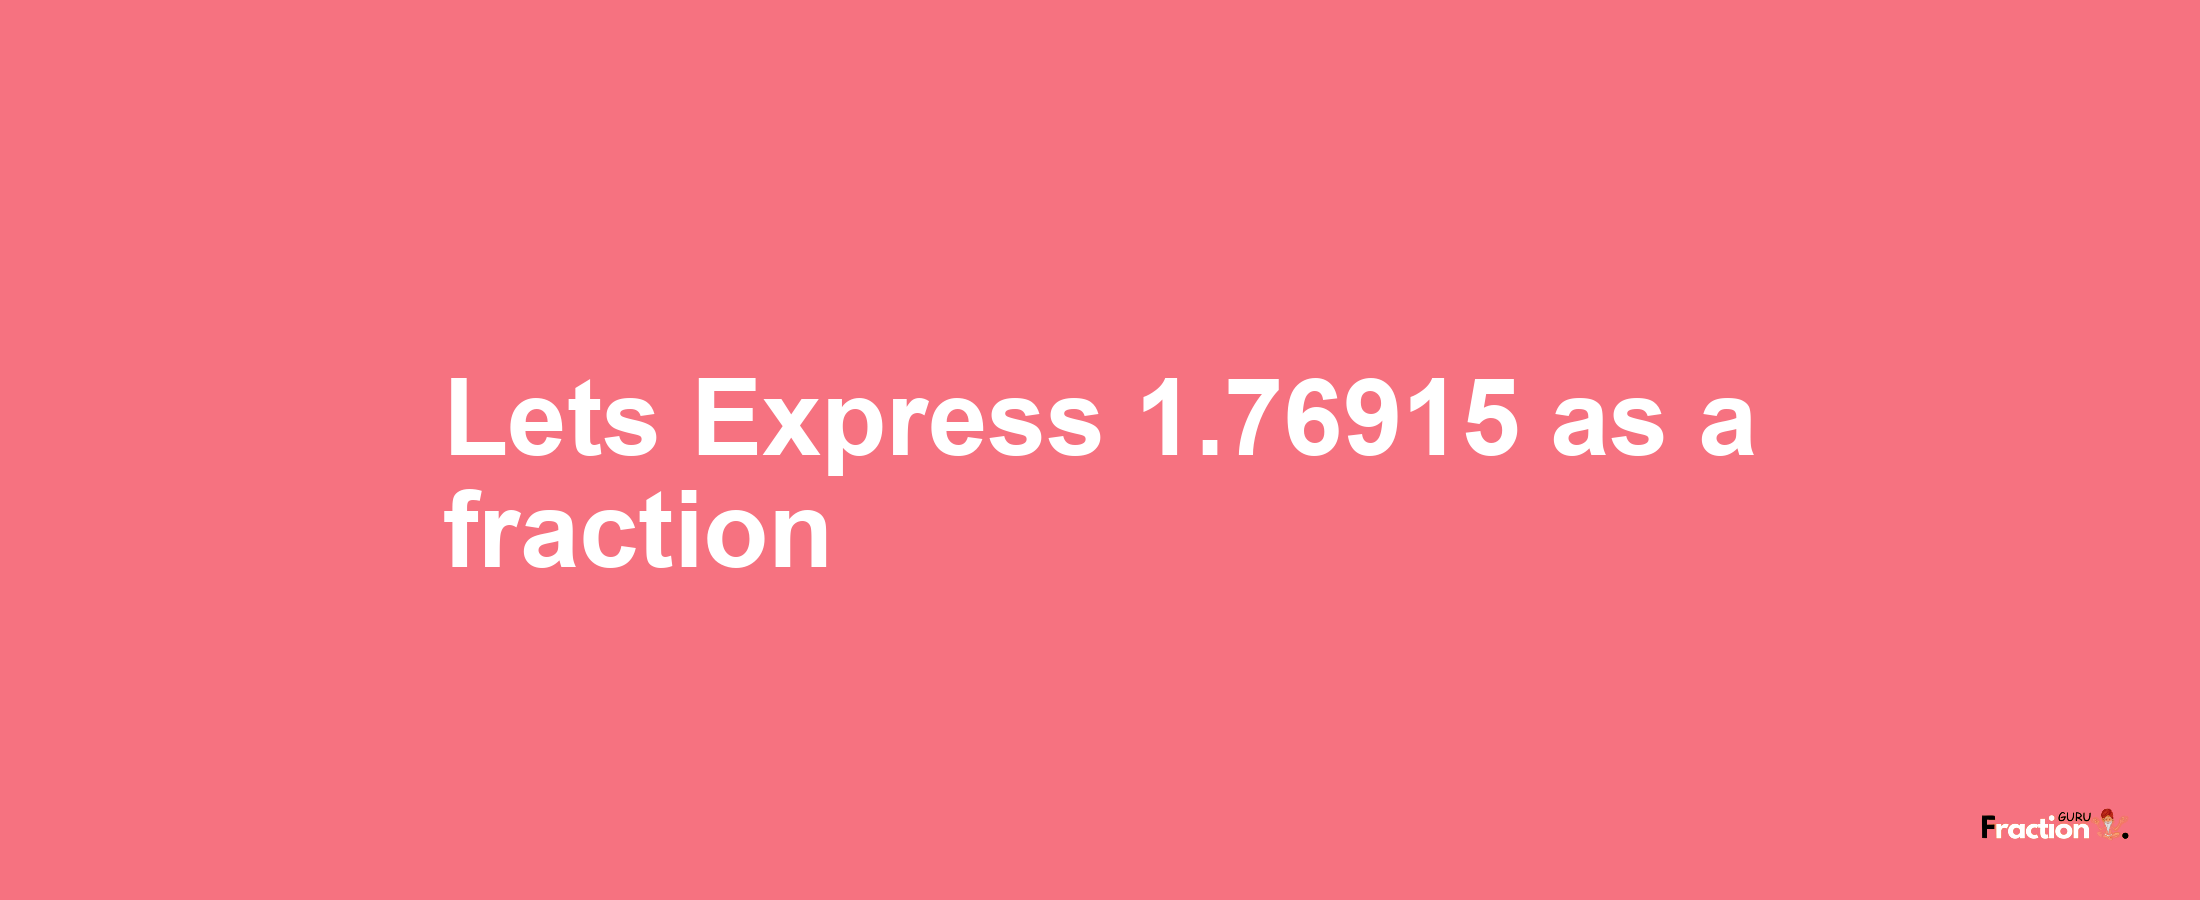 Lets Express 1.76915 as afraction